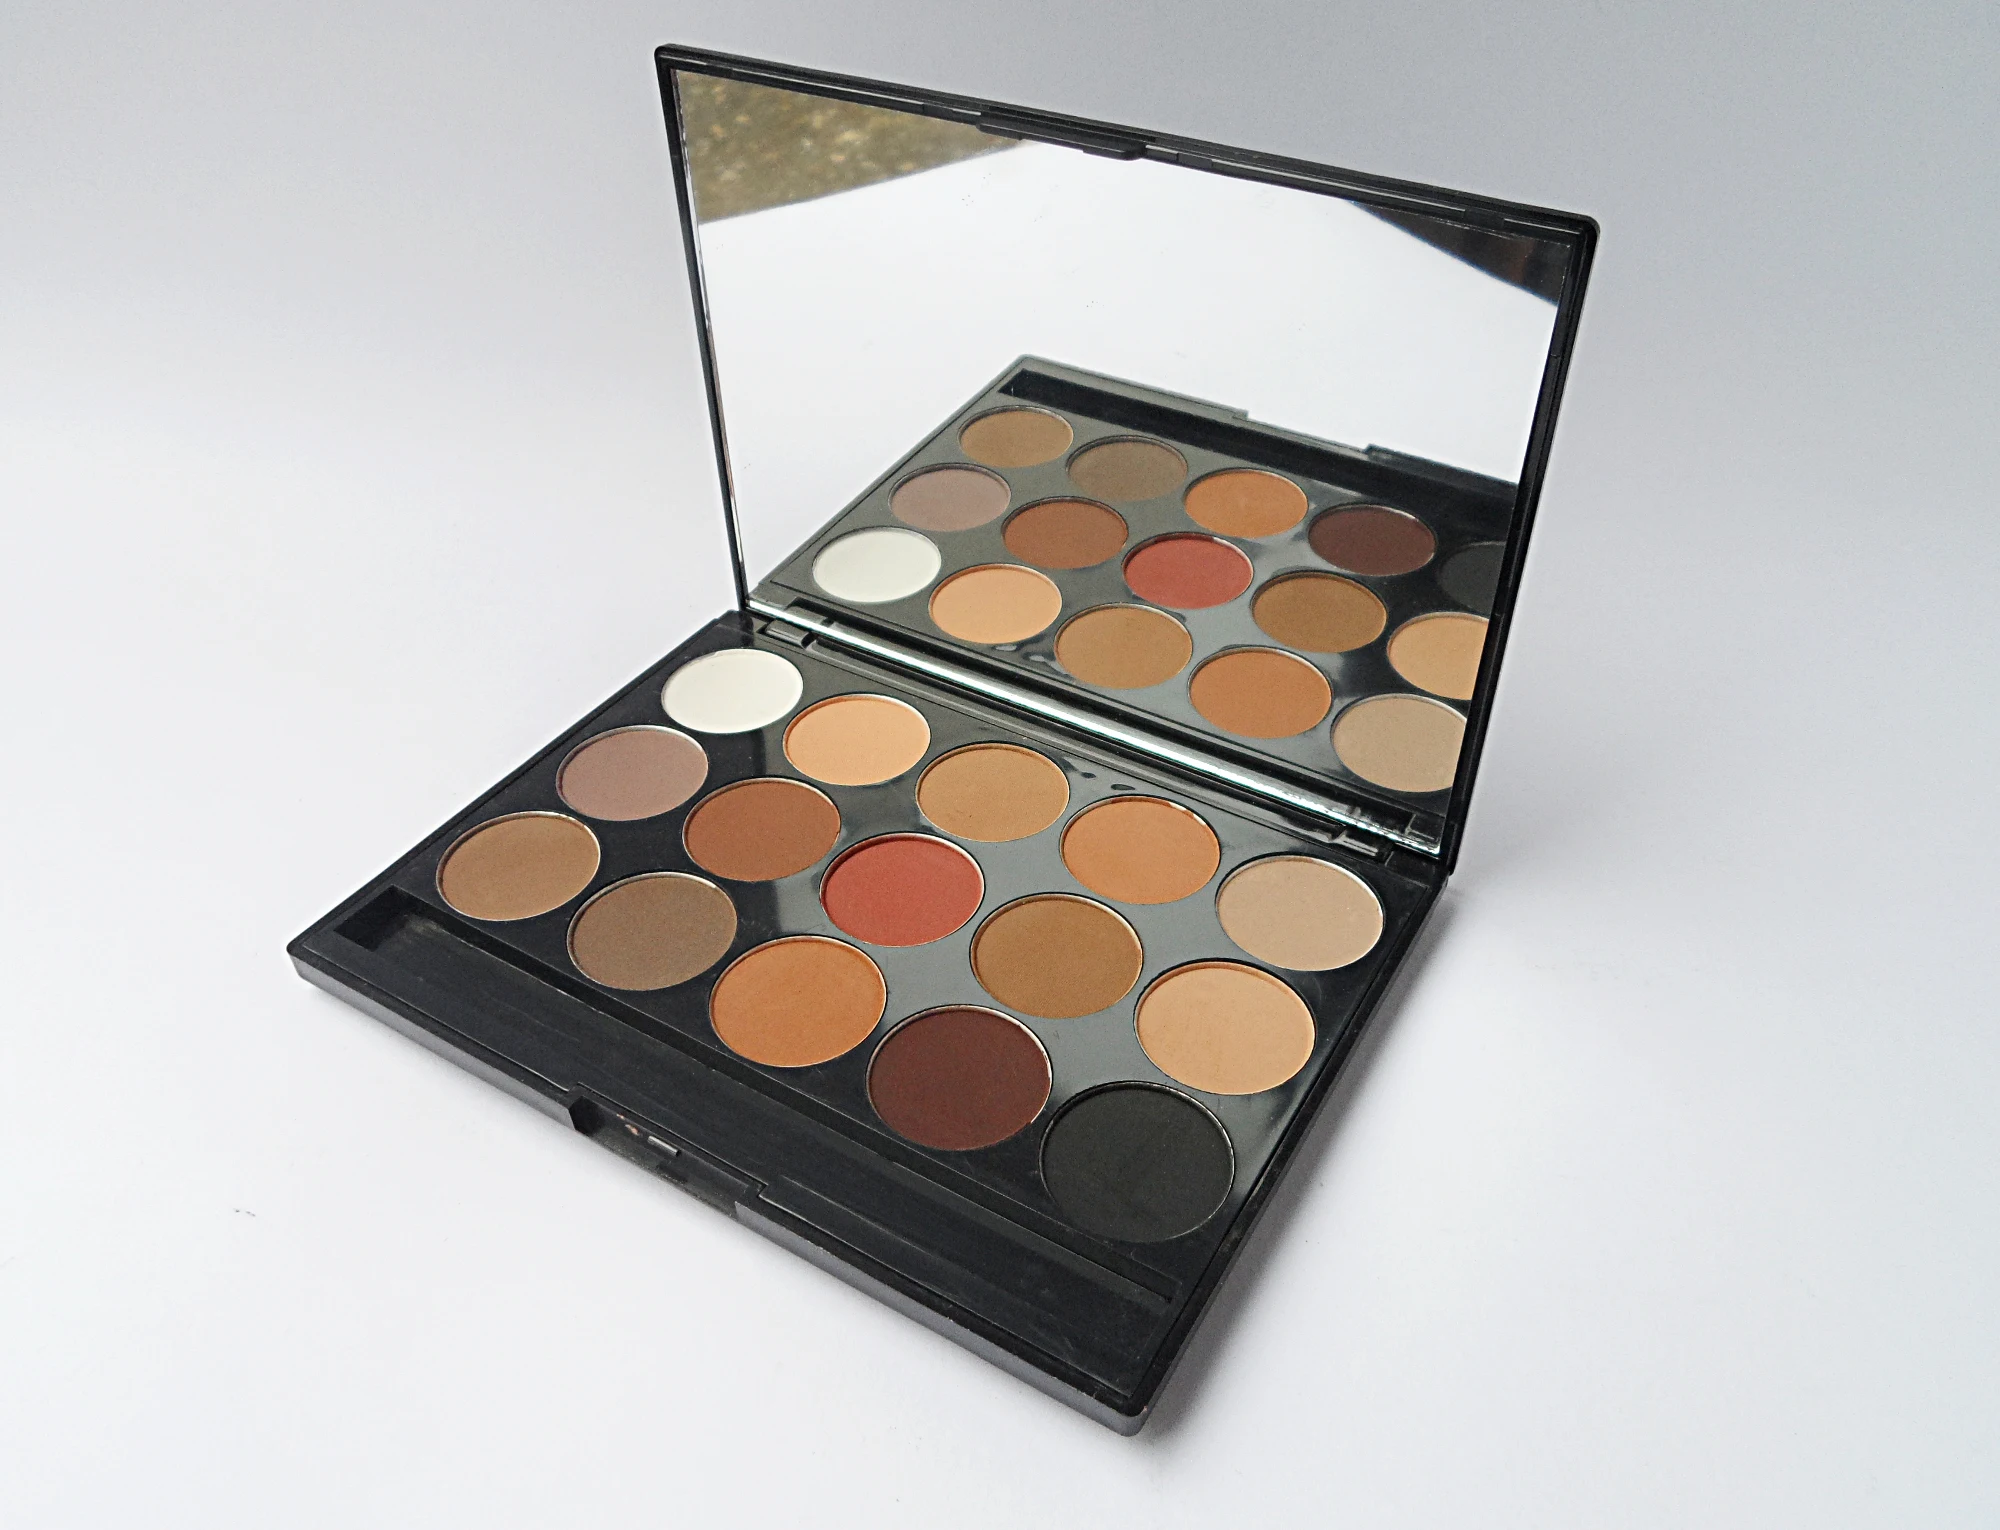 a studio picture of an eyesahdow palette on a plain background